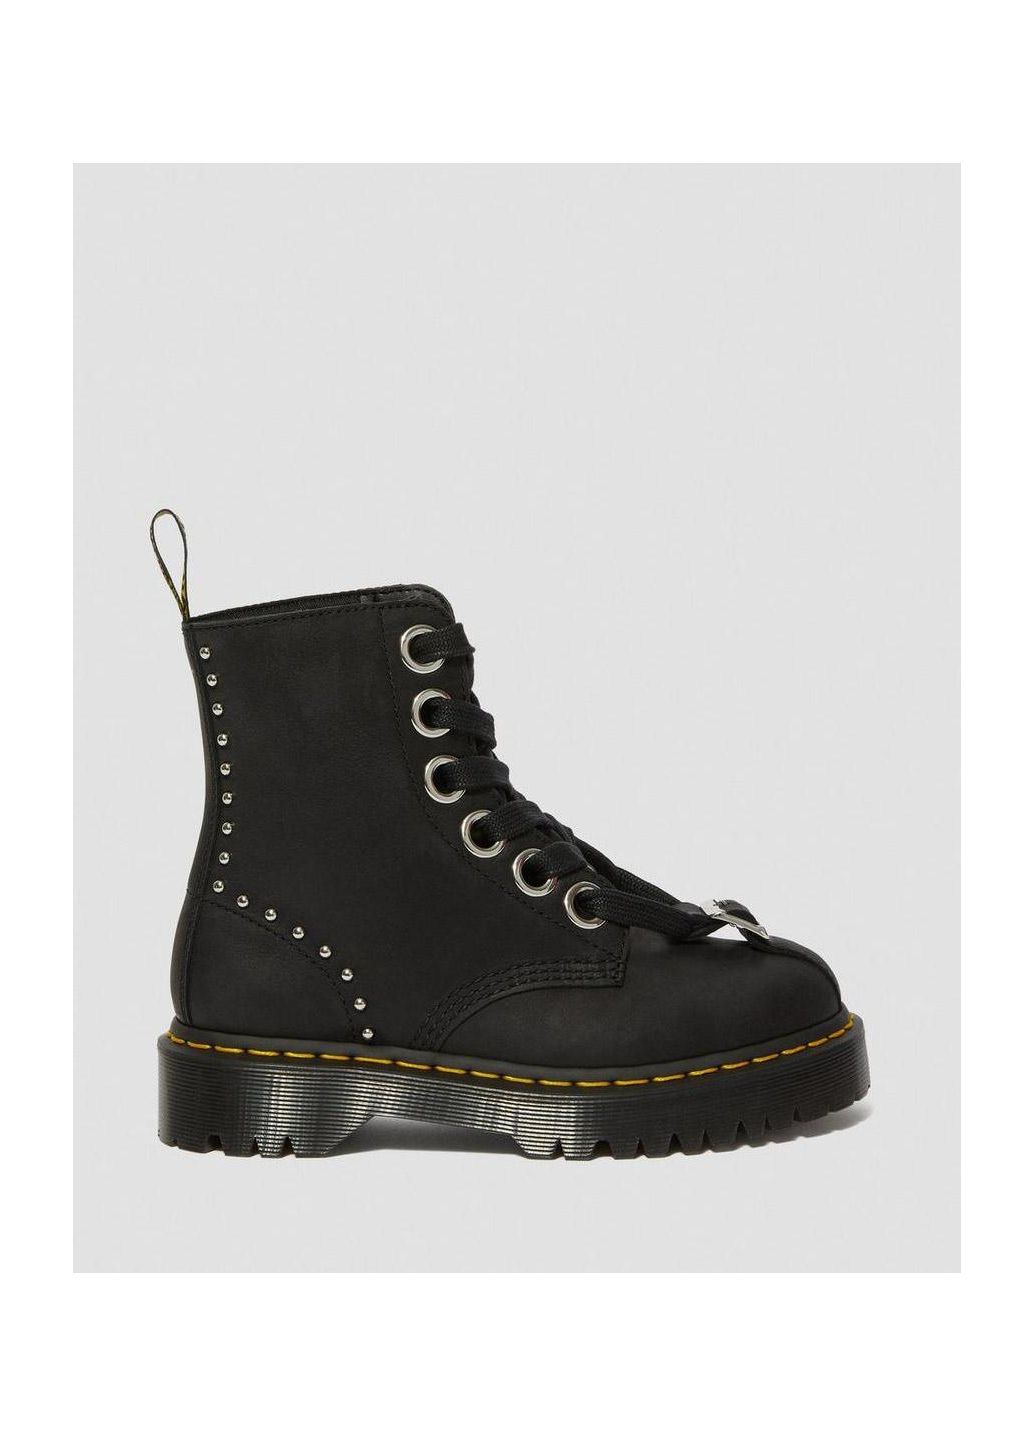 Dr. Martens Gomez Boots - Kate's Clothing